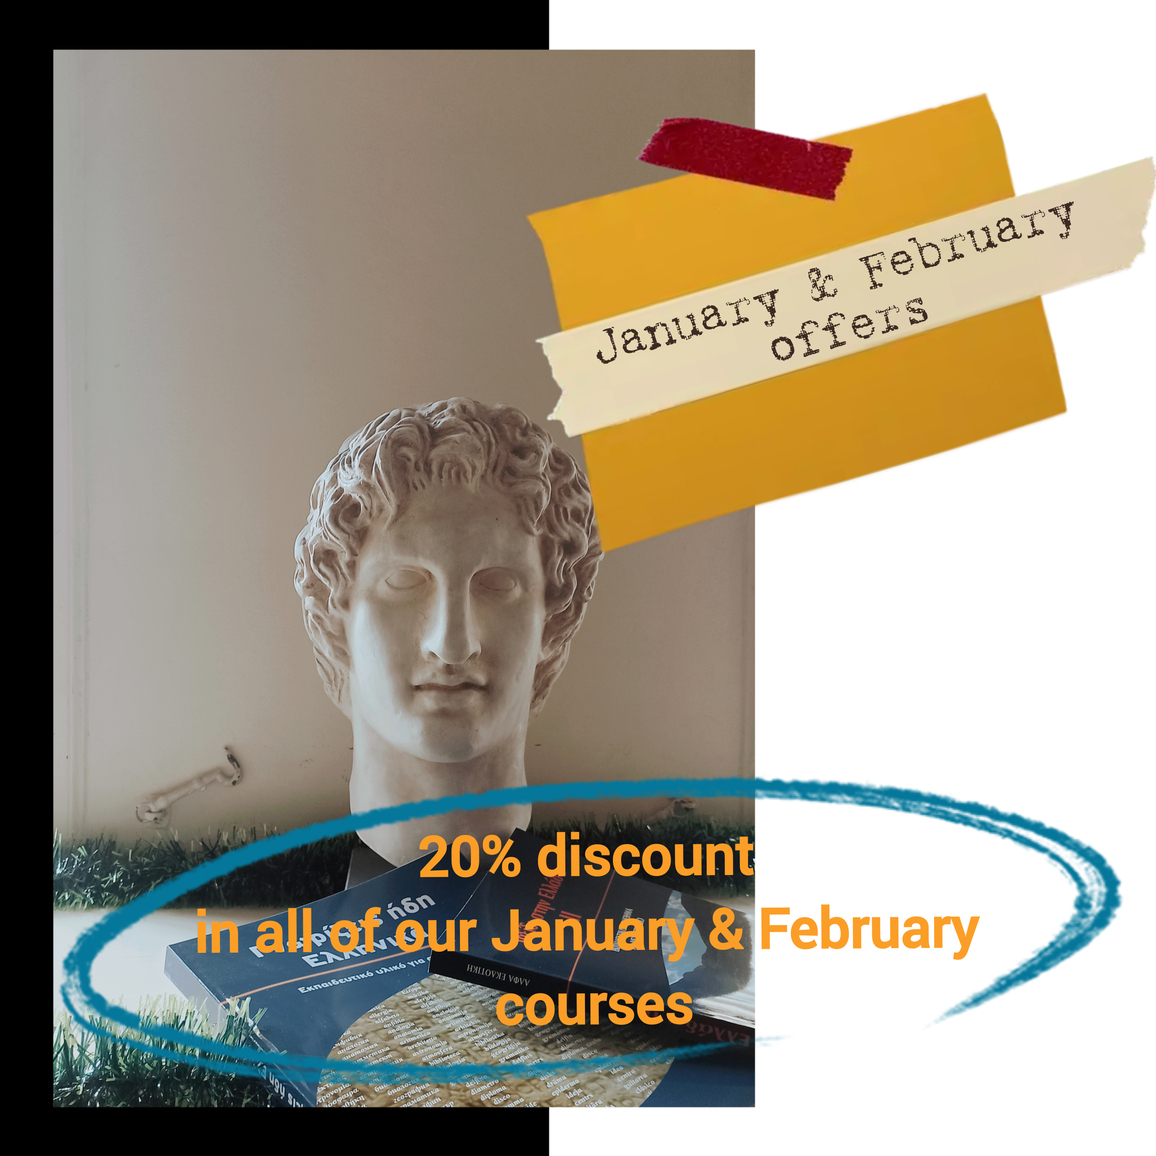 You are currently viewing Offers & Discounts: January & February limited offers